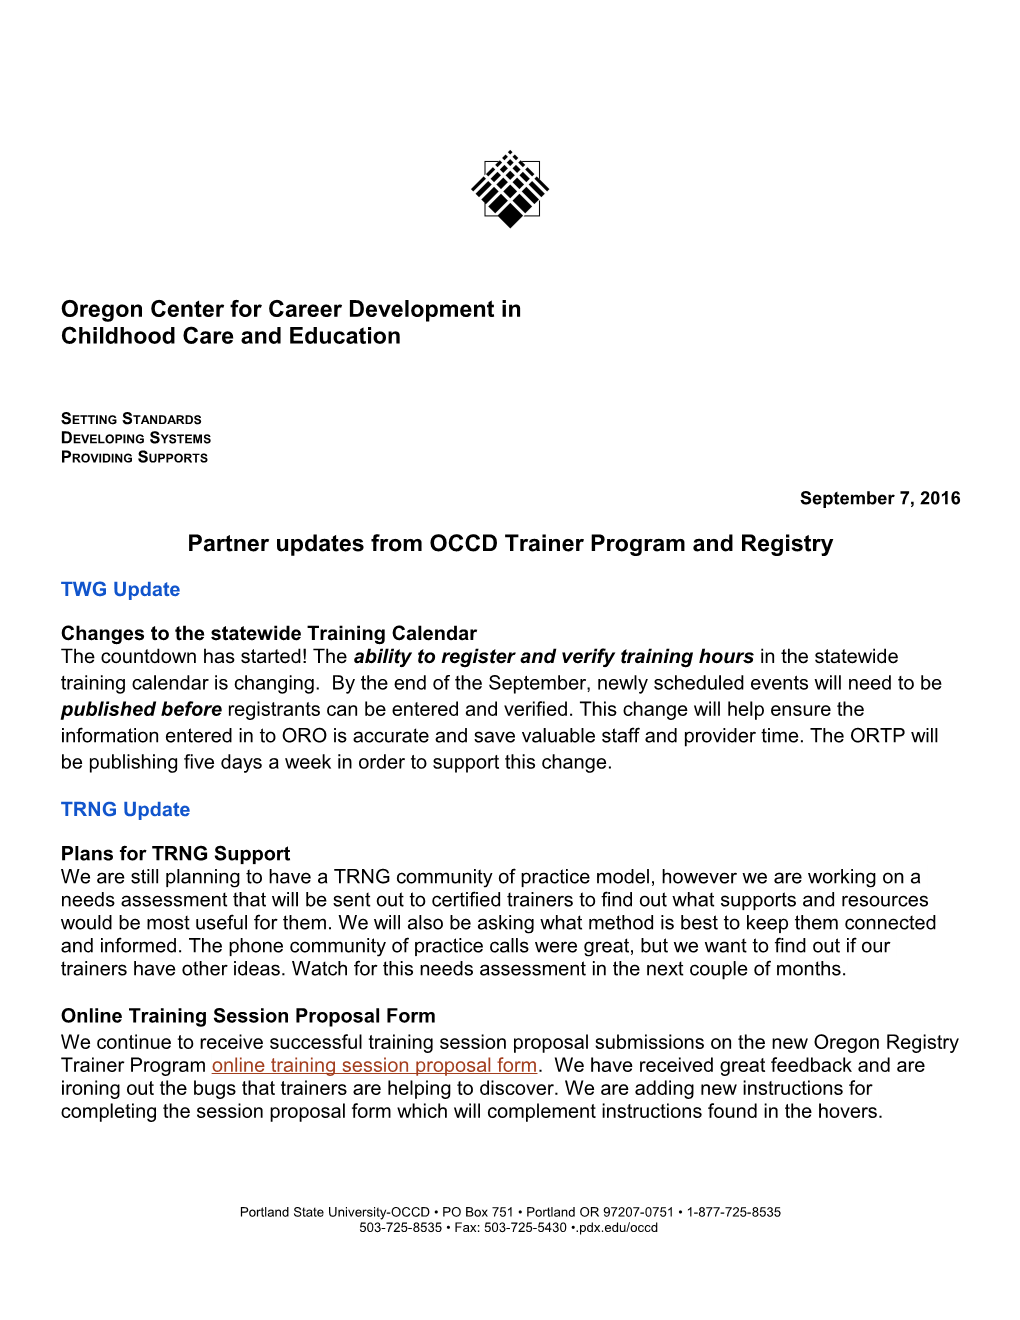 Partner Updates from OCCD Trainer Program and Registry